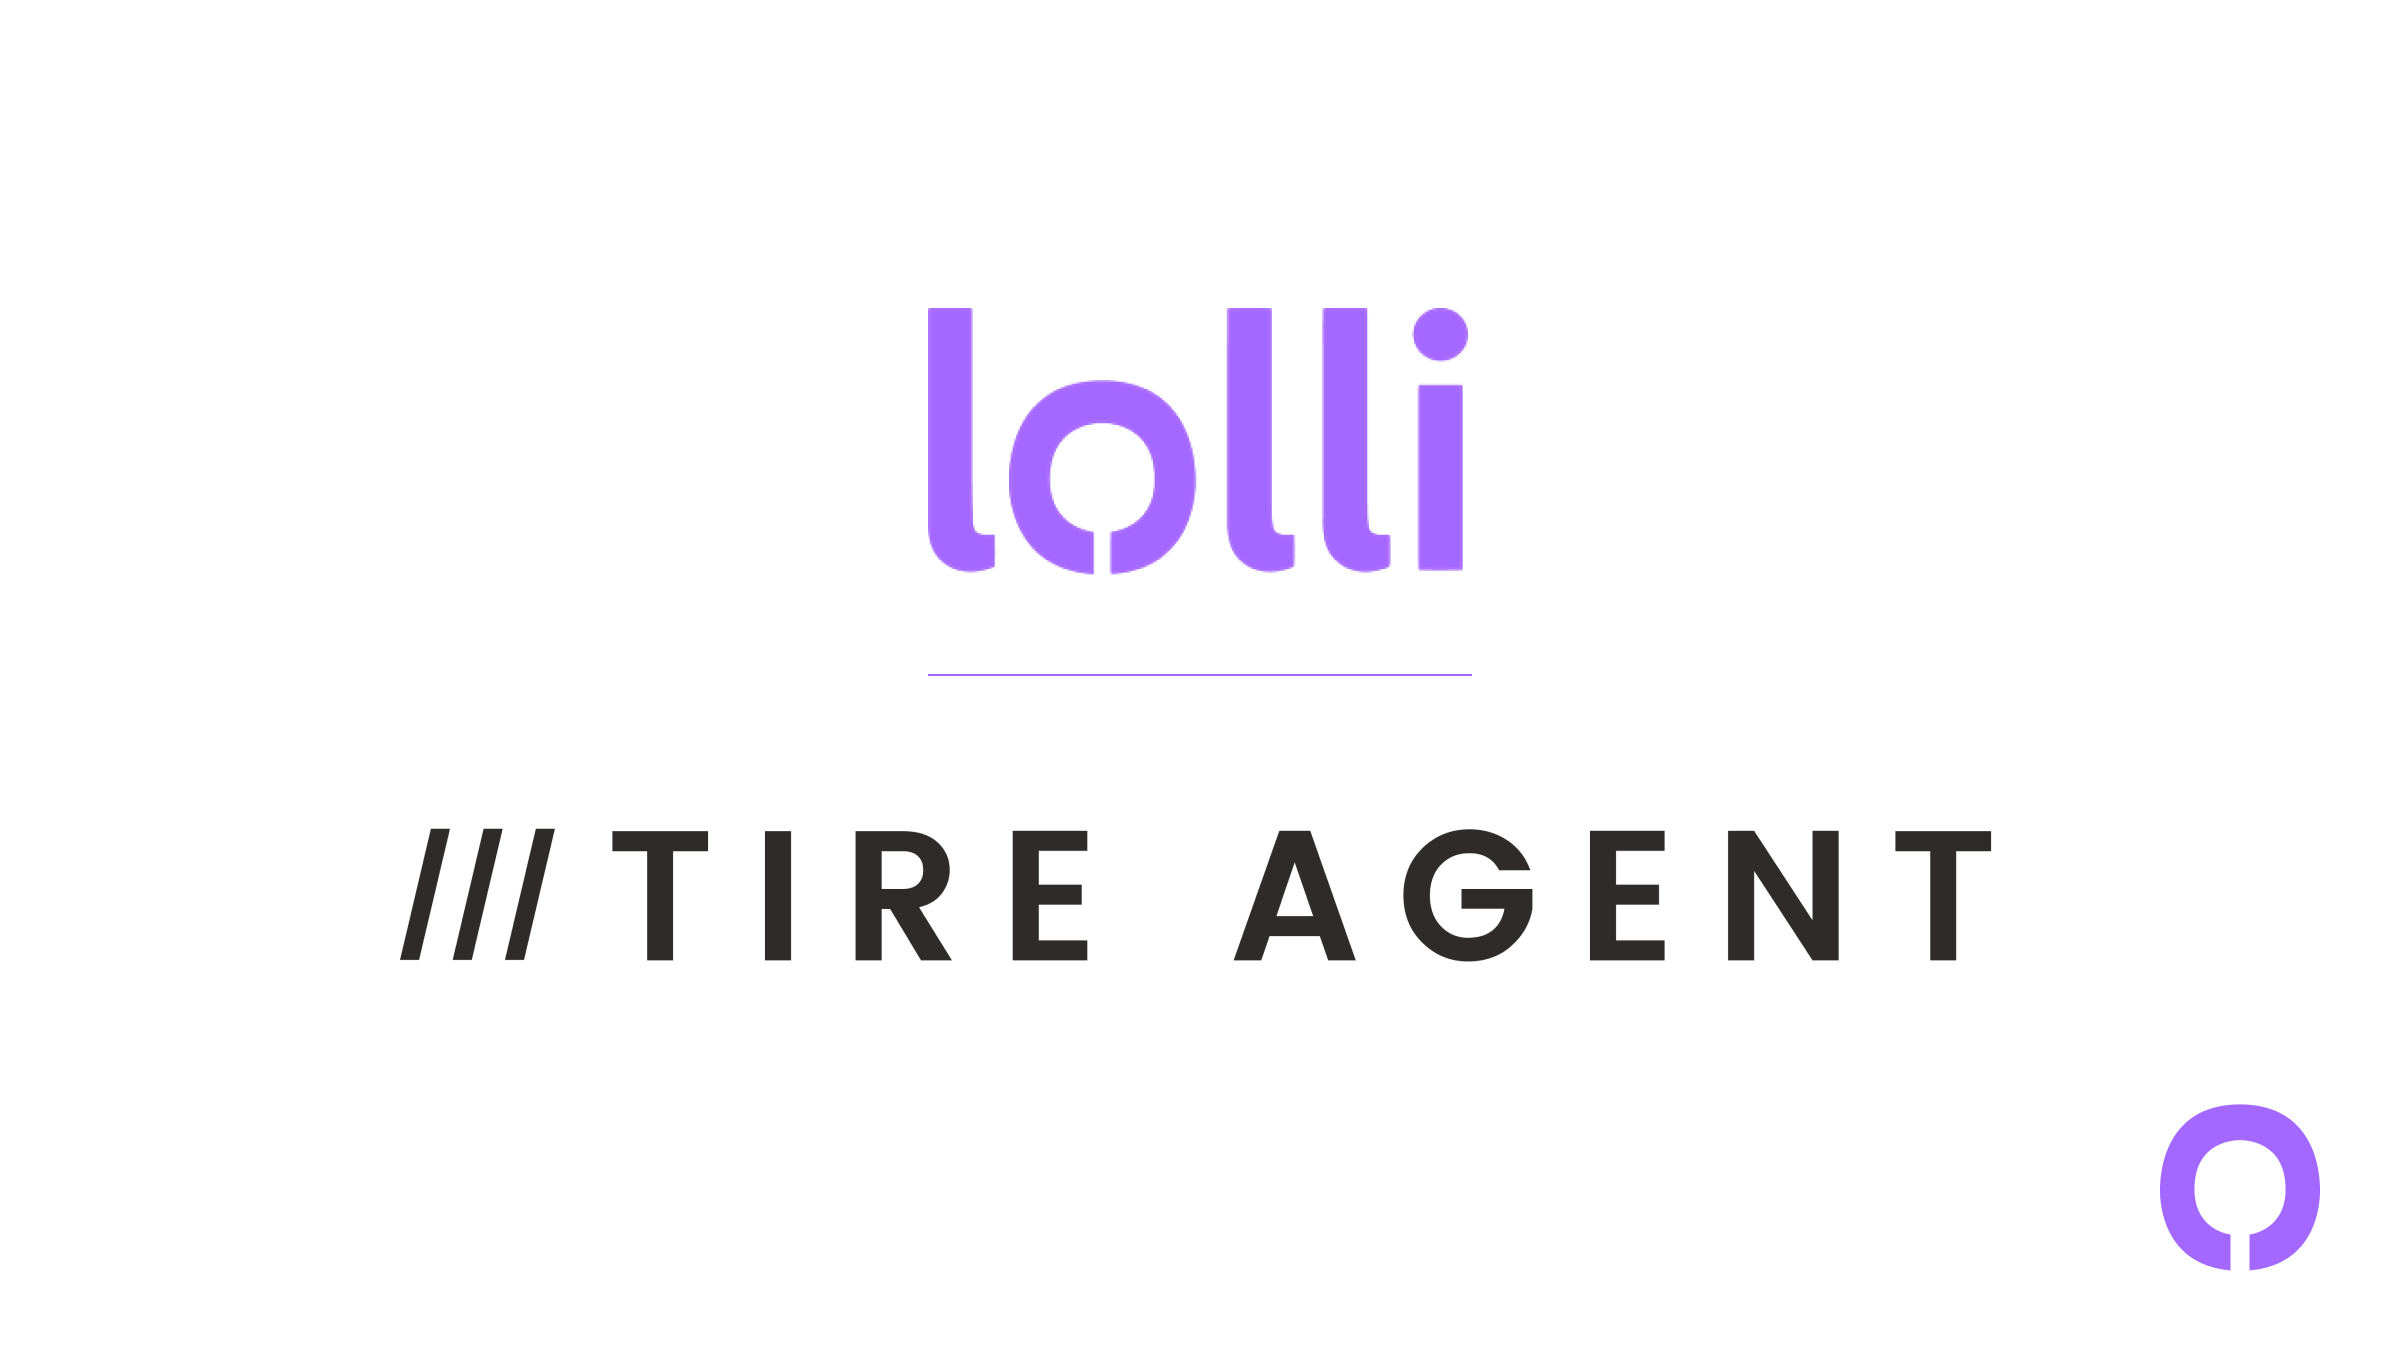 Tire Agent Is Now on Lolli!